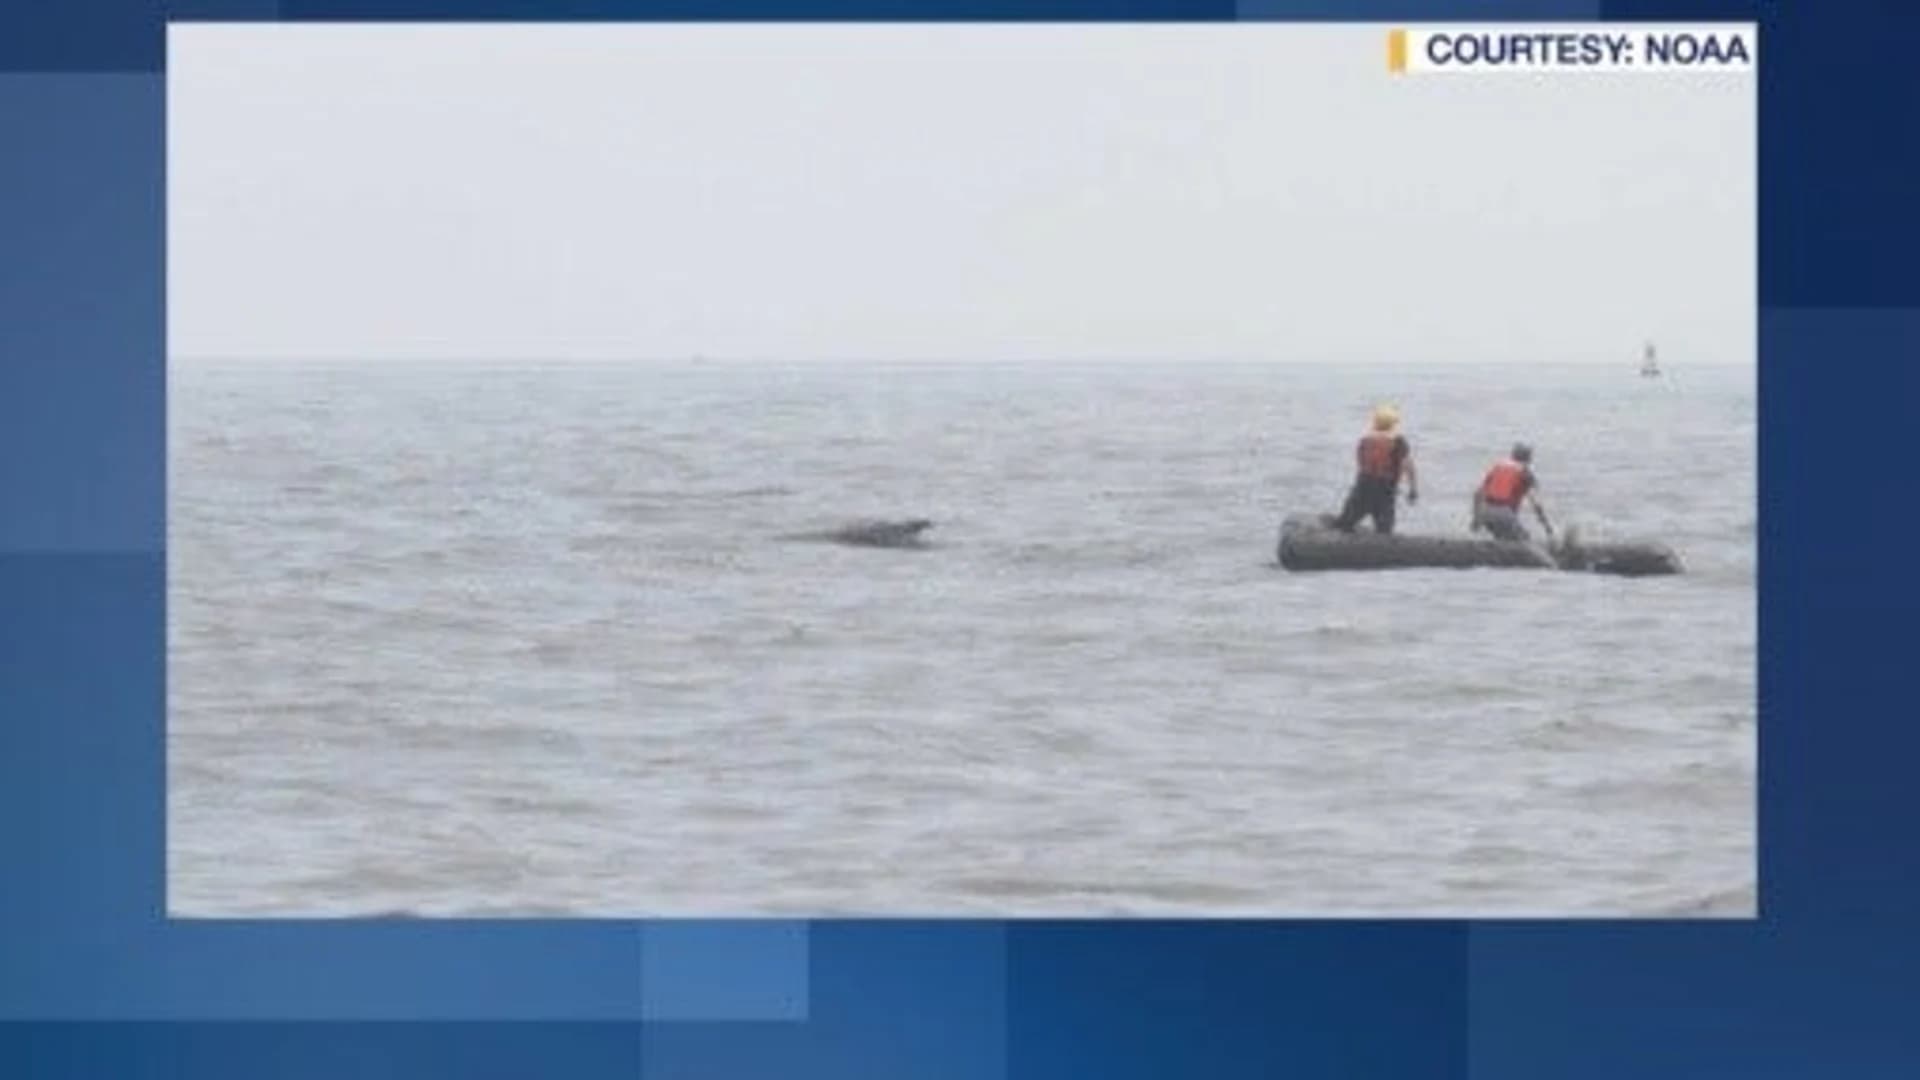 Crews successfully disentangle distressed humpback whale